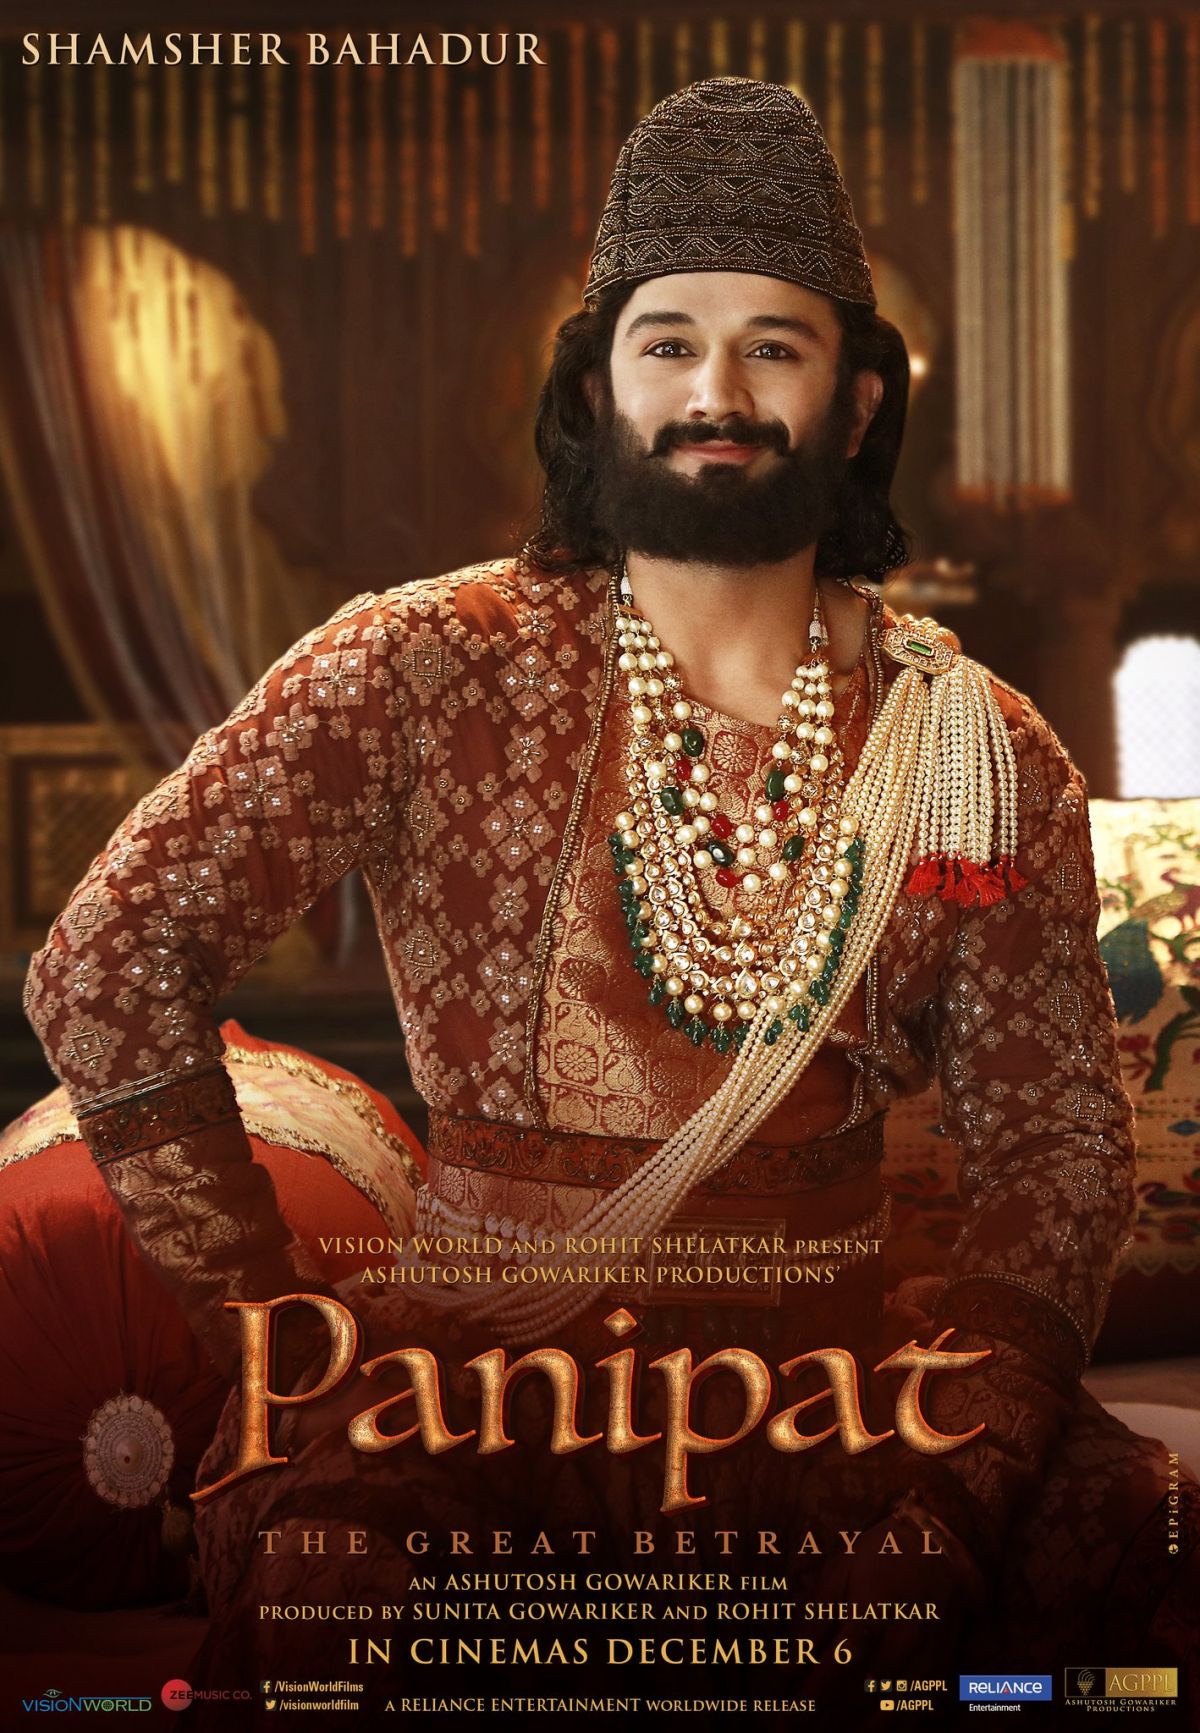 Box Office: Panipat could not succeded in attracting audience, earned this much